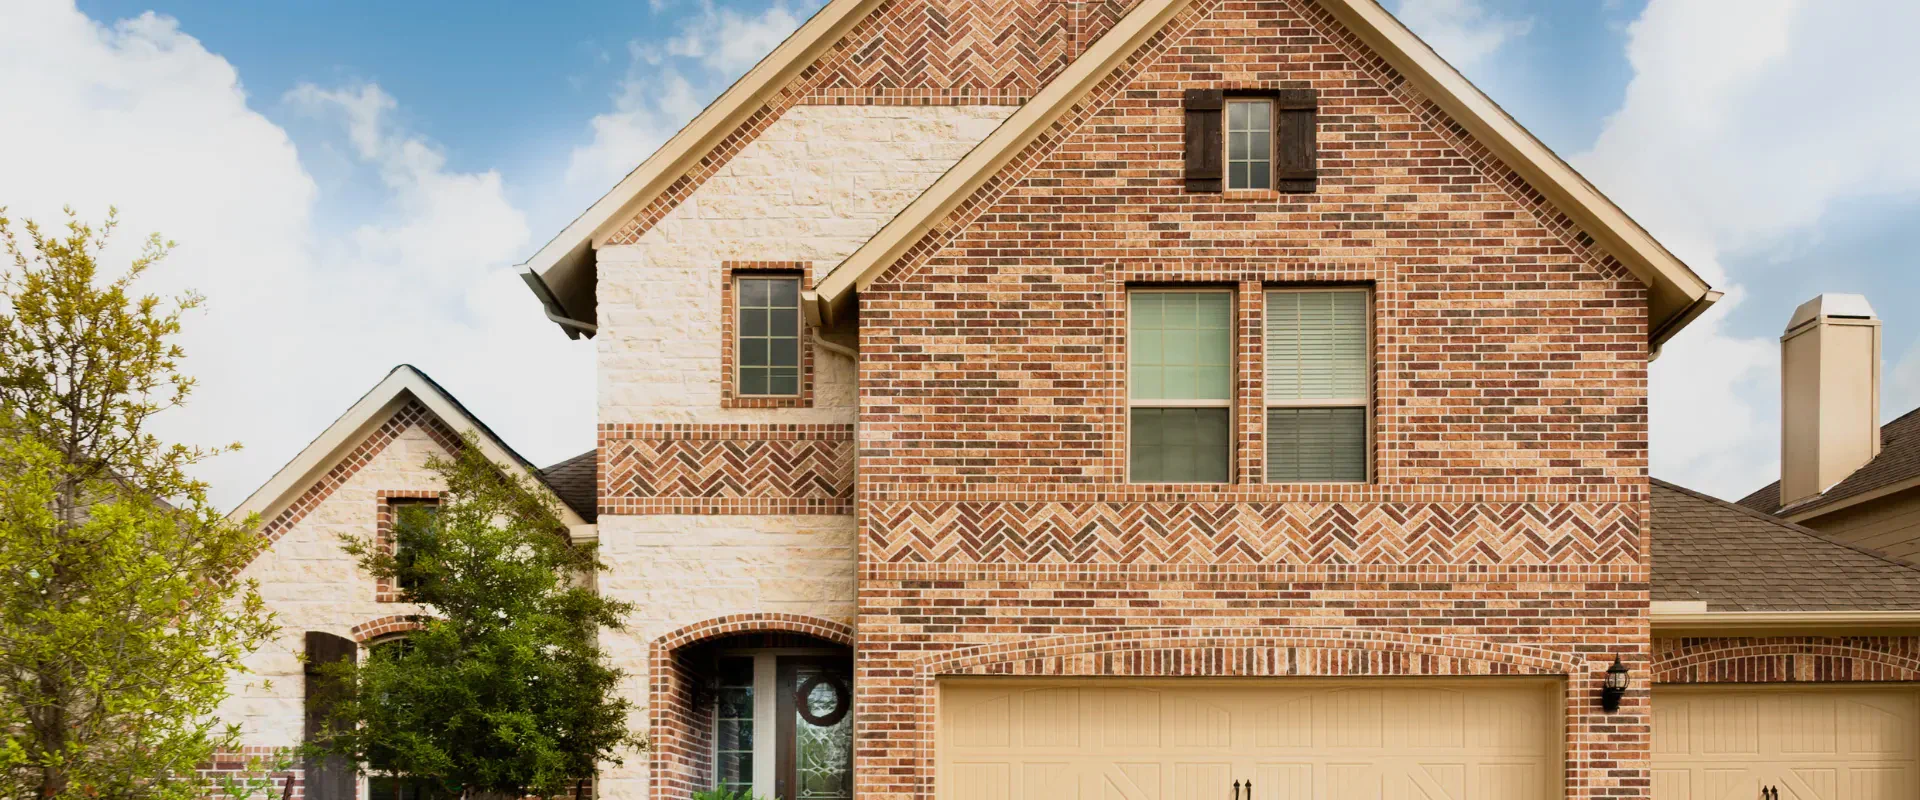 beige bricked wall house with some trees outside and beige garage doors alvin tx